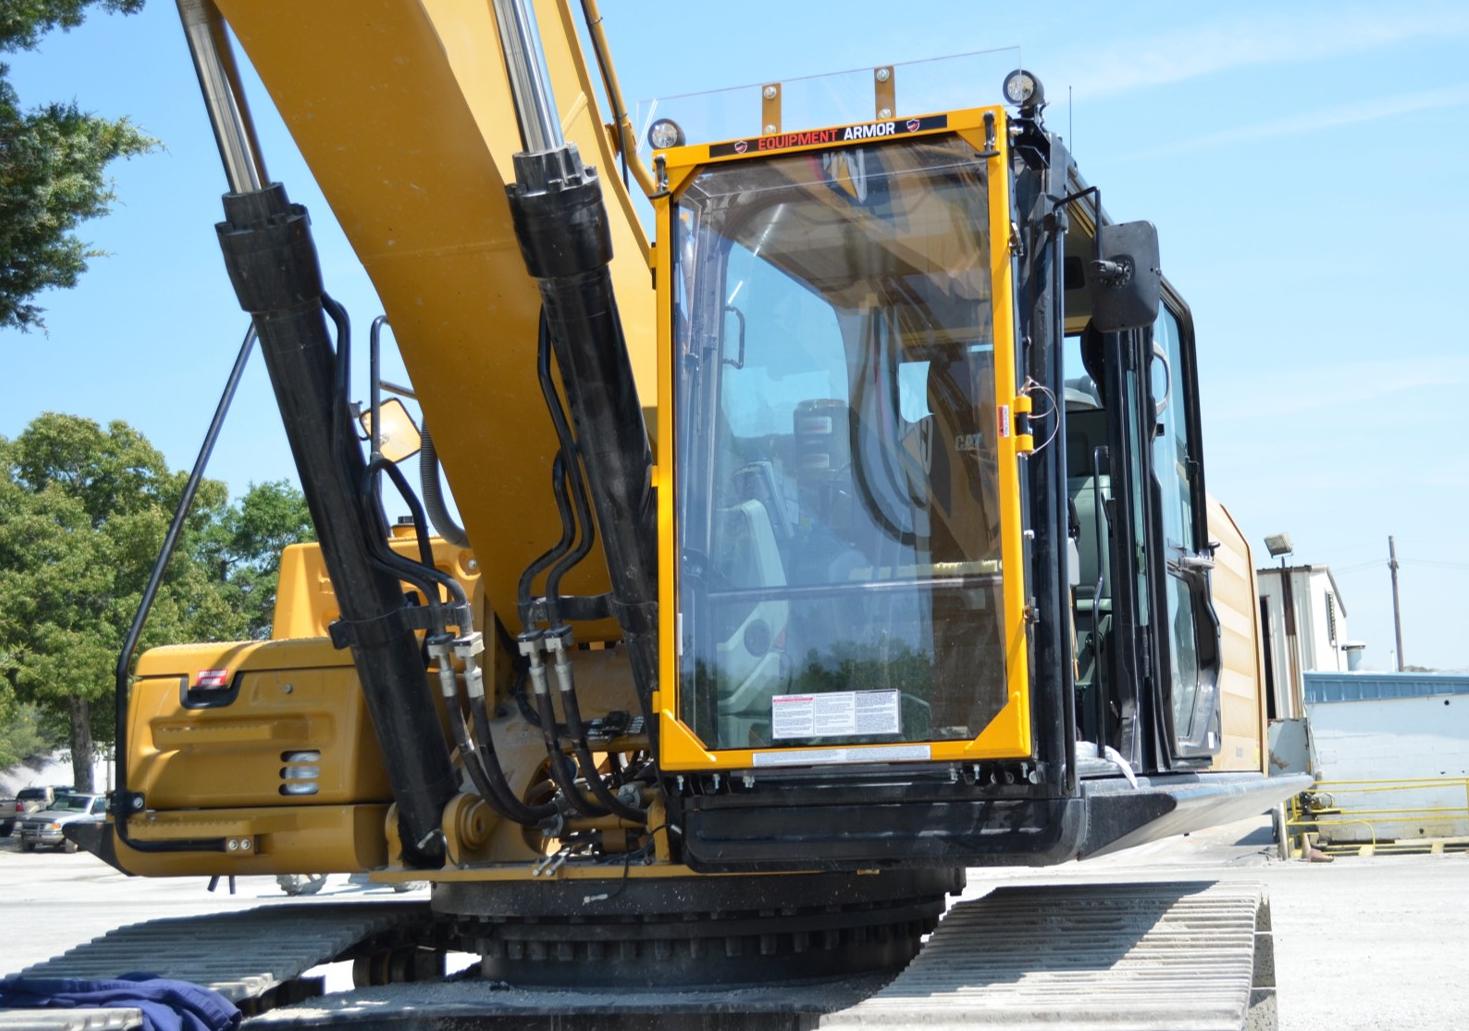 Protective Cab Guards and Doors for Construction Equipment